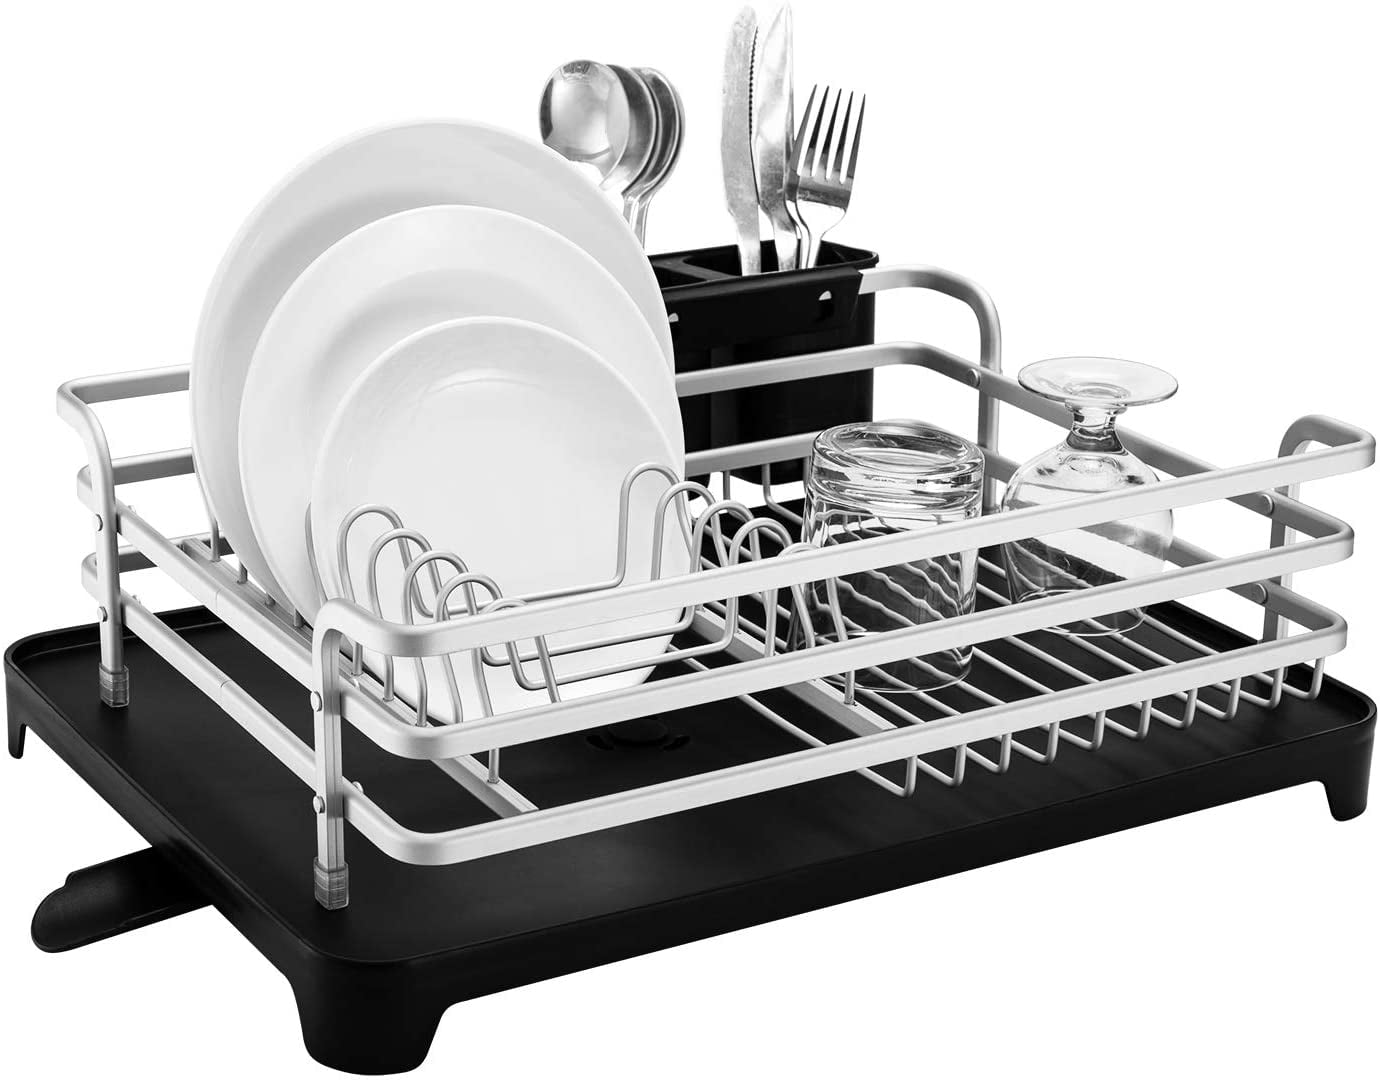 Aluminum Dish Rack with Cutlery Holder Removable Drainer Tray